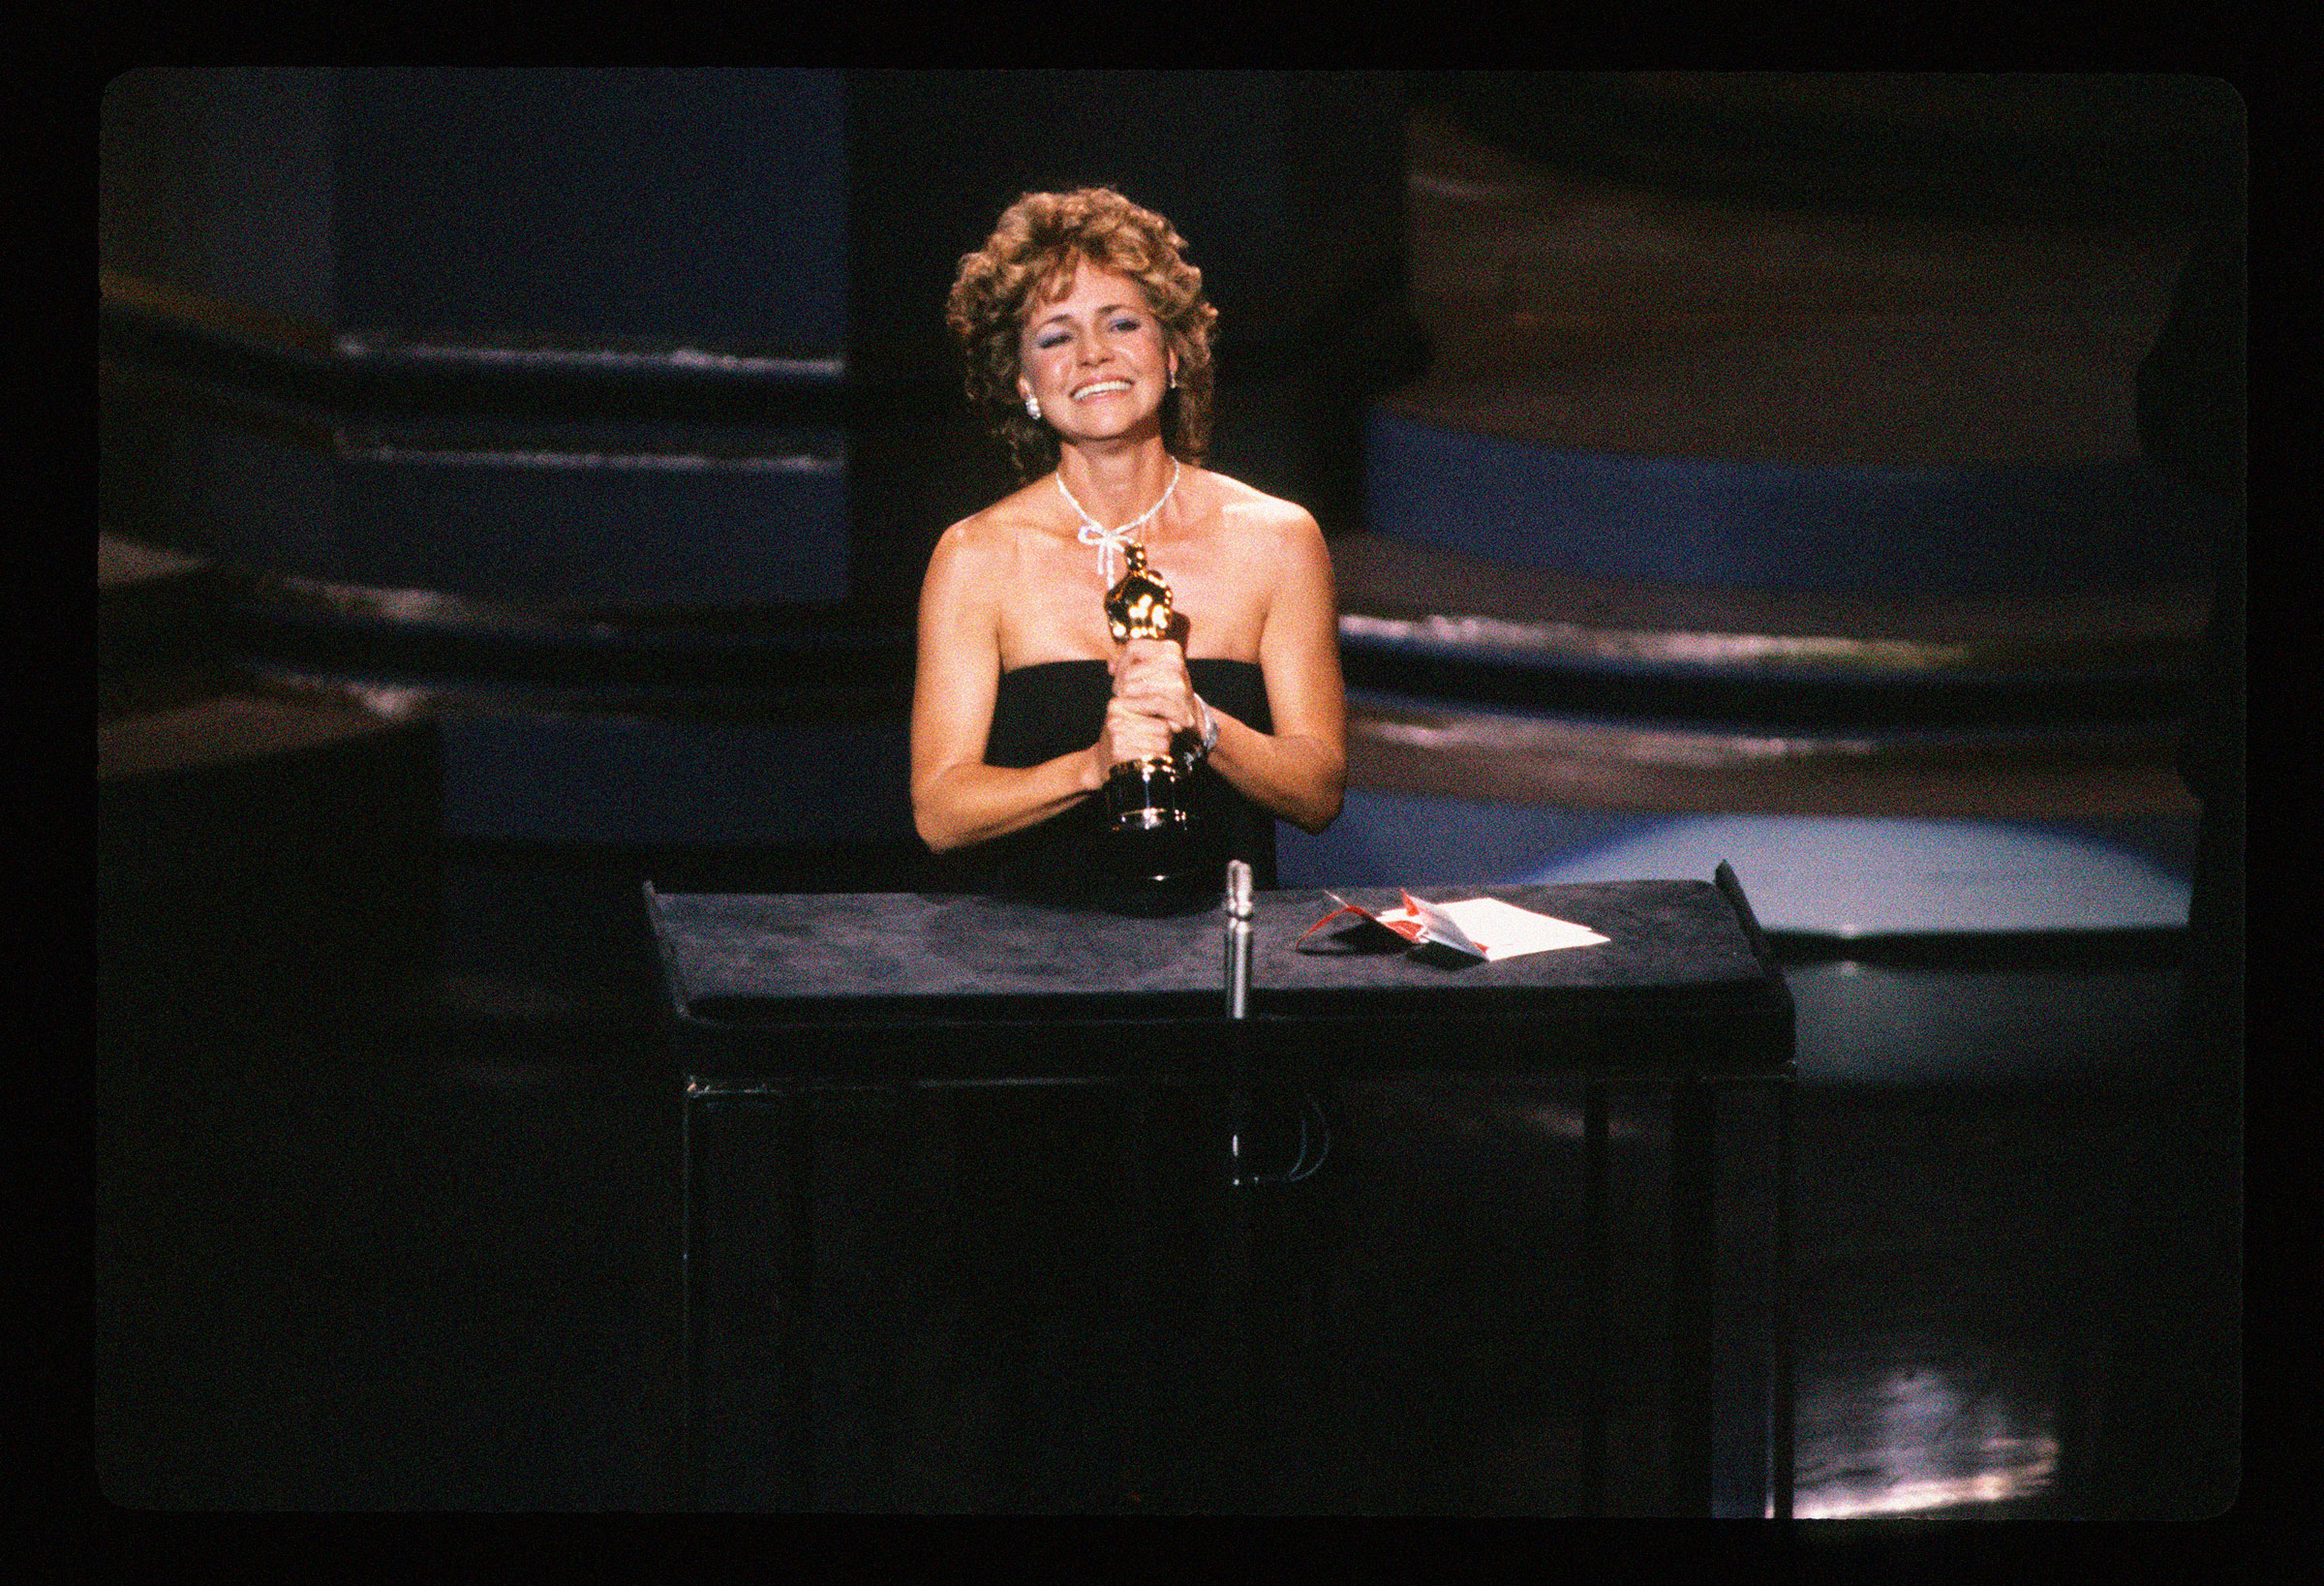 Sally Field accepts the Oscar for Best Actress for her role in the film Places in the Heart at the 57th Academy Awards on March 25, 1985.